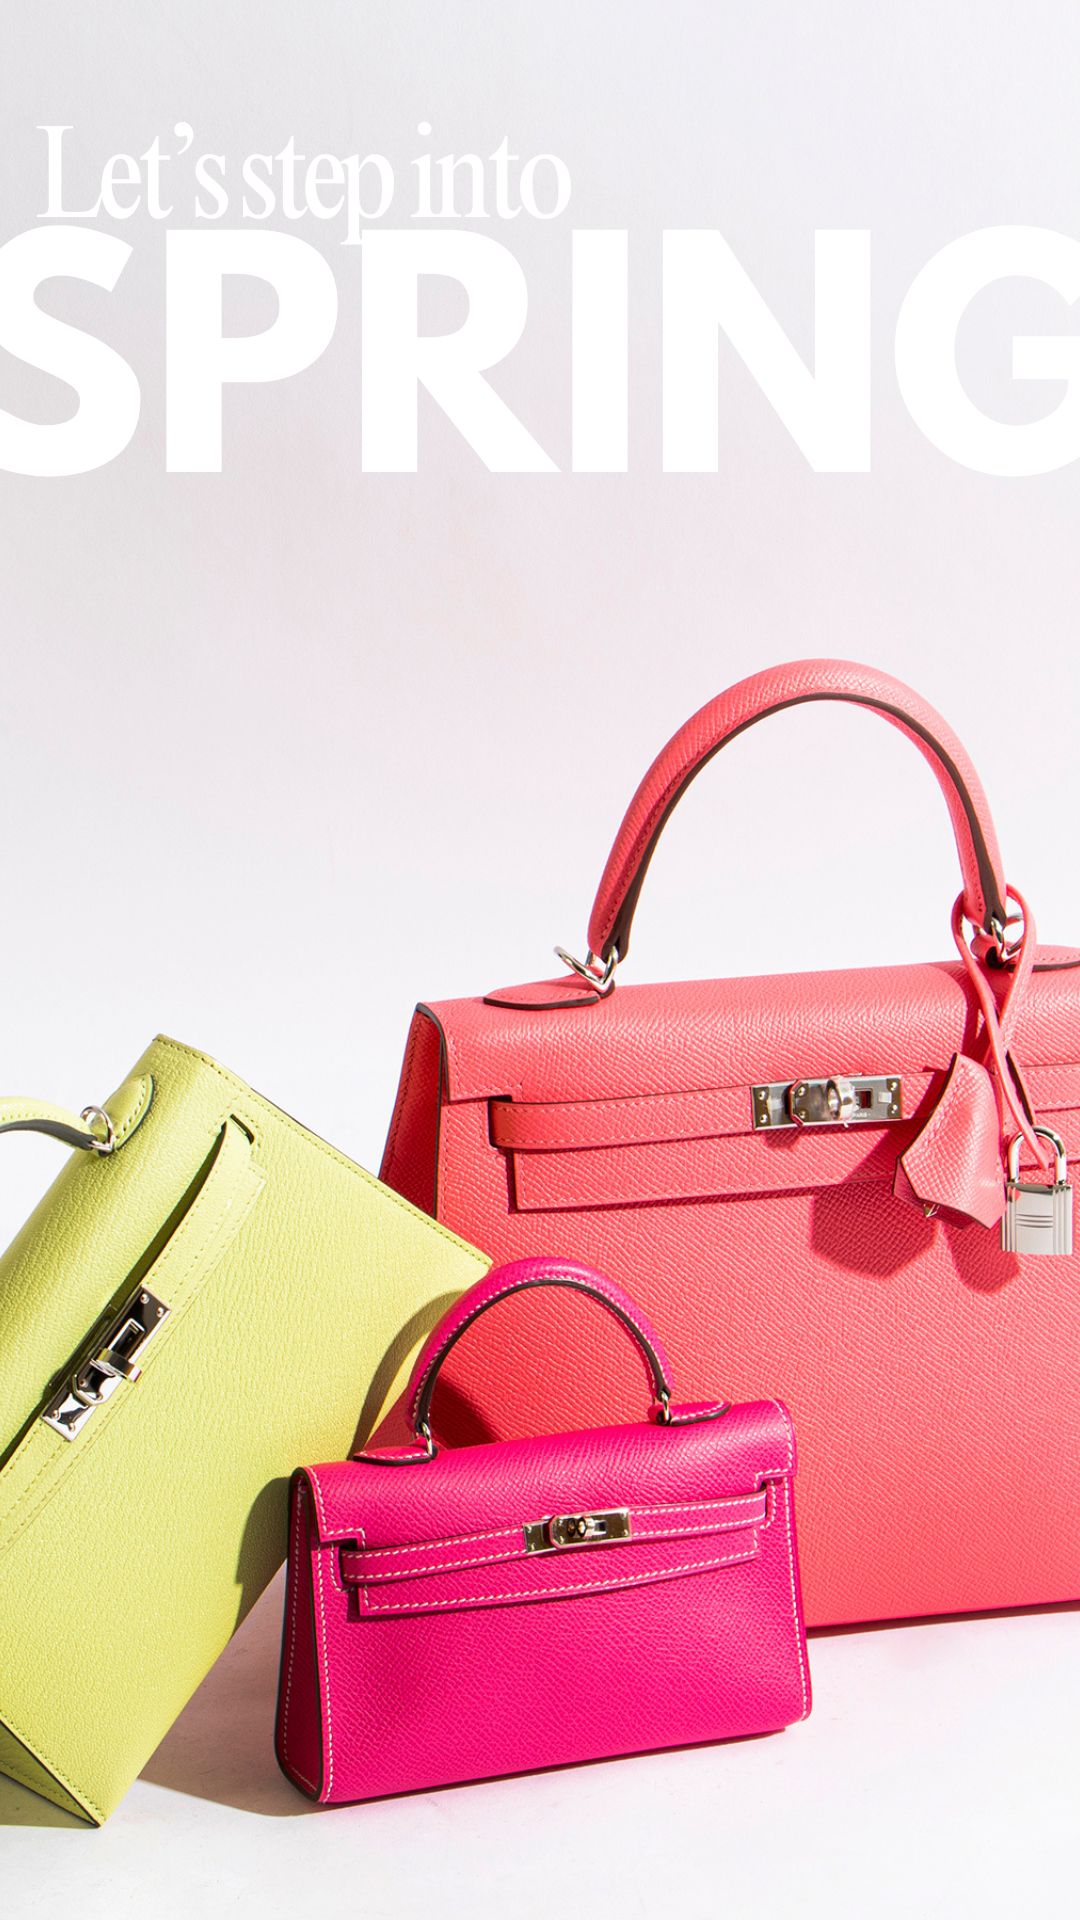 Bag Trends that will make your Spring Outfits